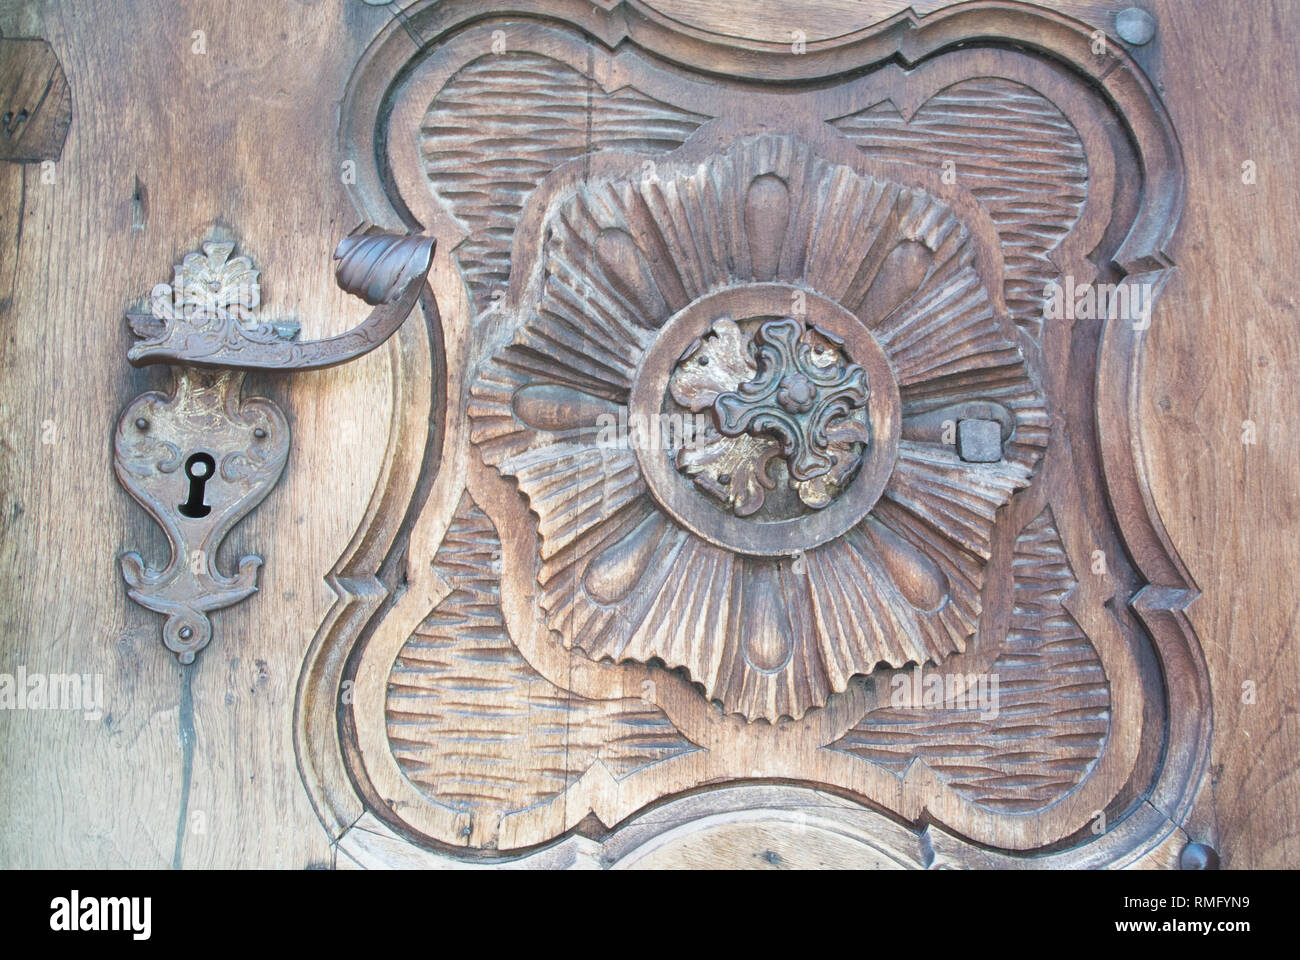 Detail of the door furniture, St Michael's Church, Innichen/San Candido, Italy Stock Photo